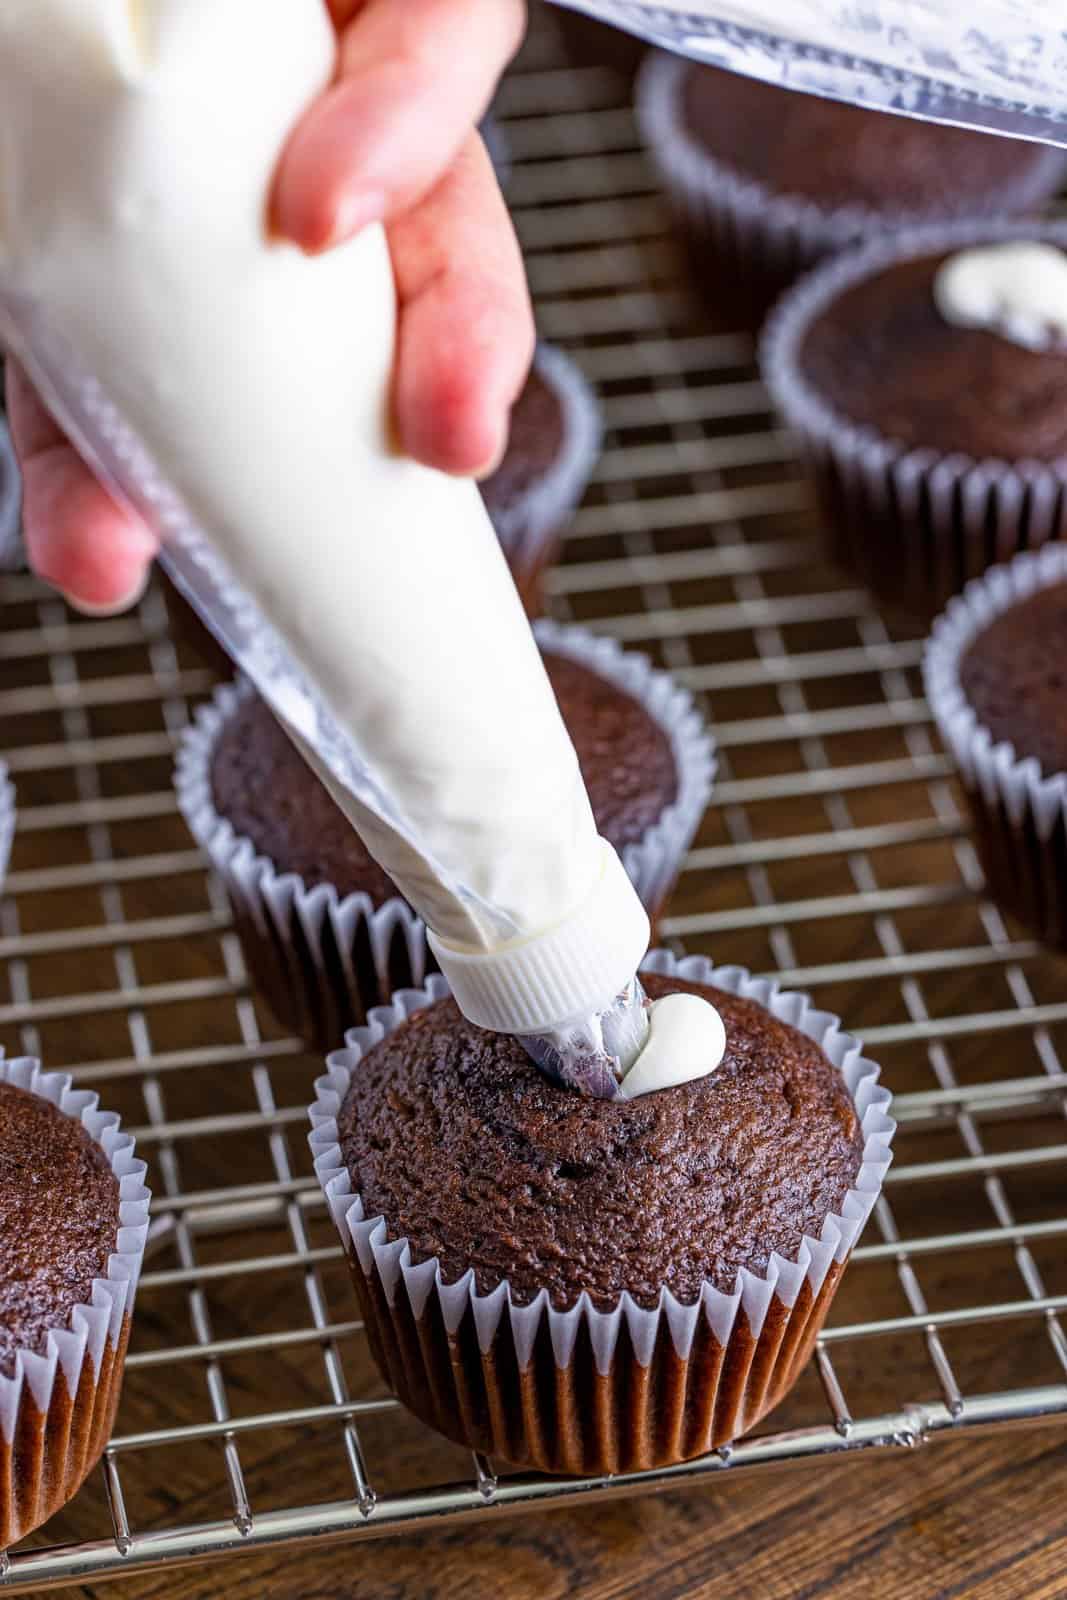 A piping bag full of filling on a chocolate cupcake.